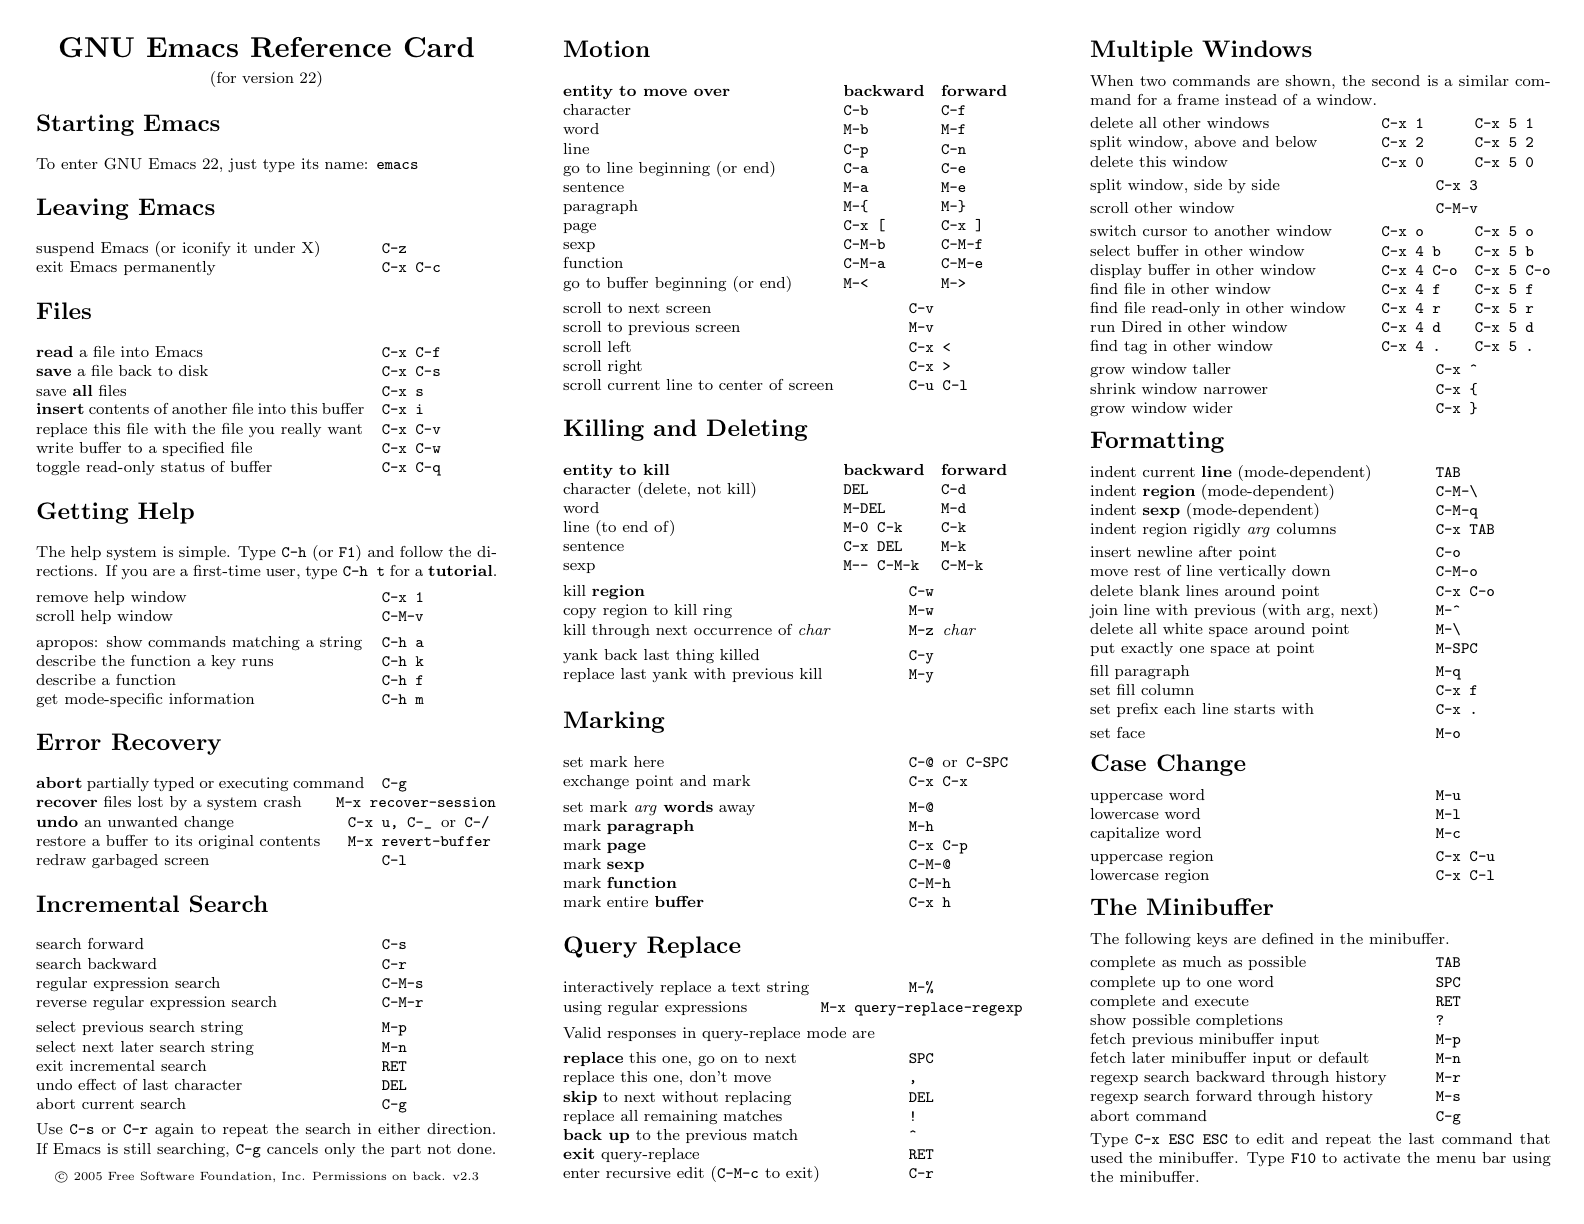 Emacs_22_Reference_Card_1.png